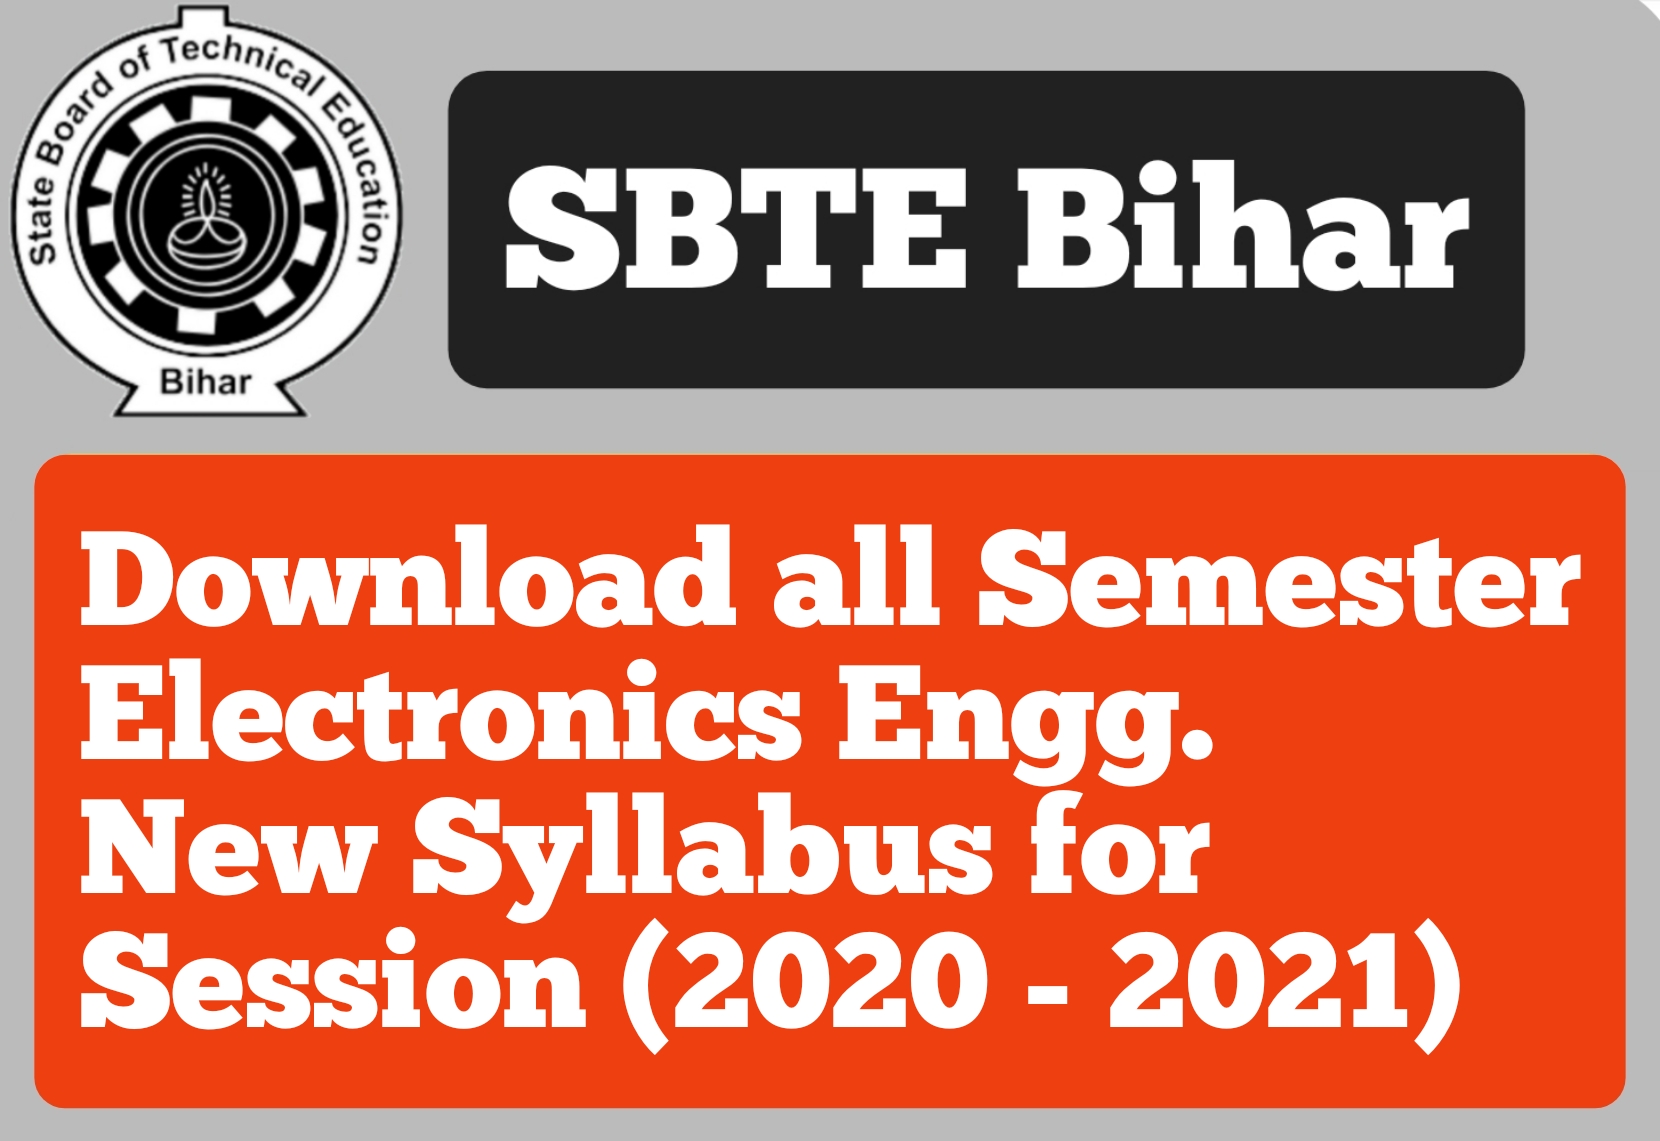 Download new syllabus of 1st, 2nd, 3rd, 4th, 5th, 6th semester Electronics Engineering